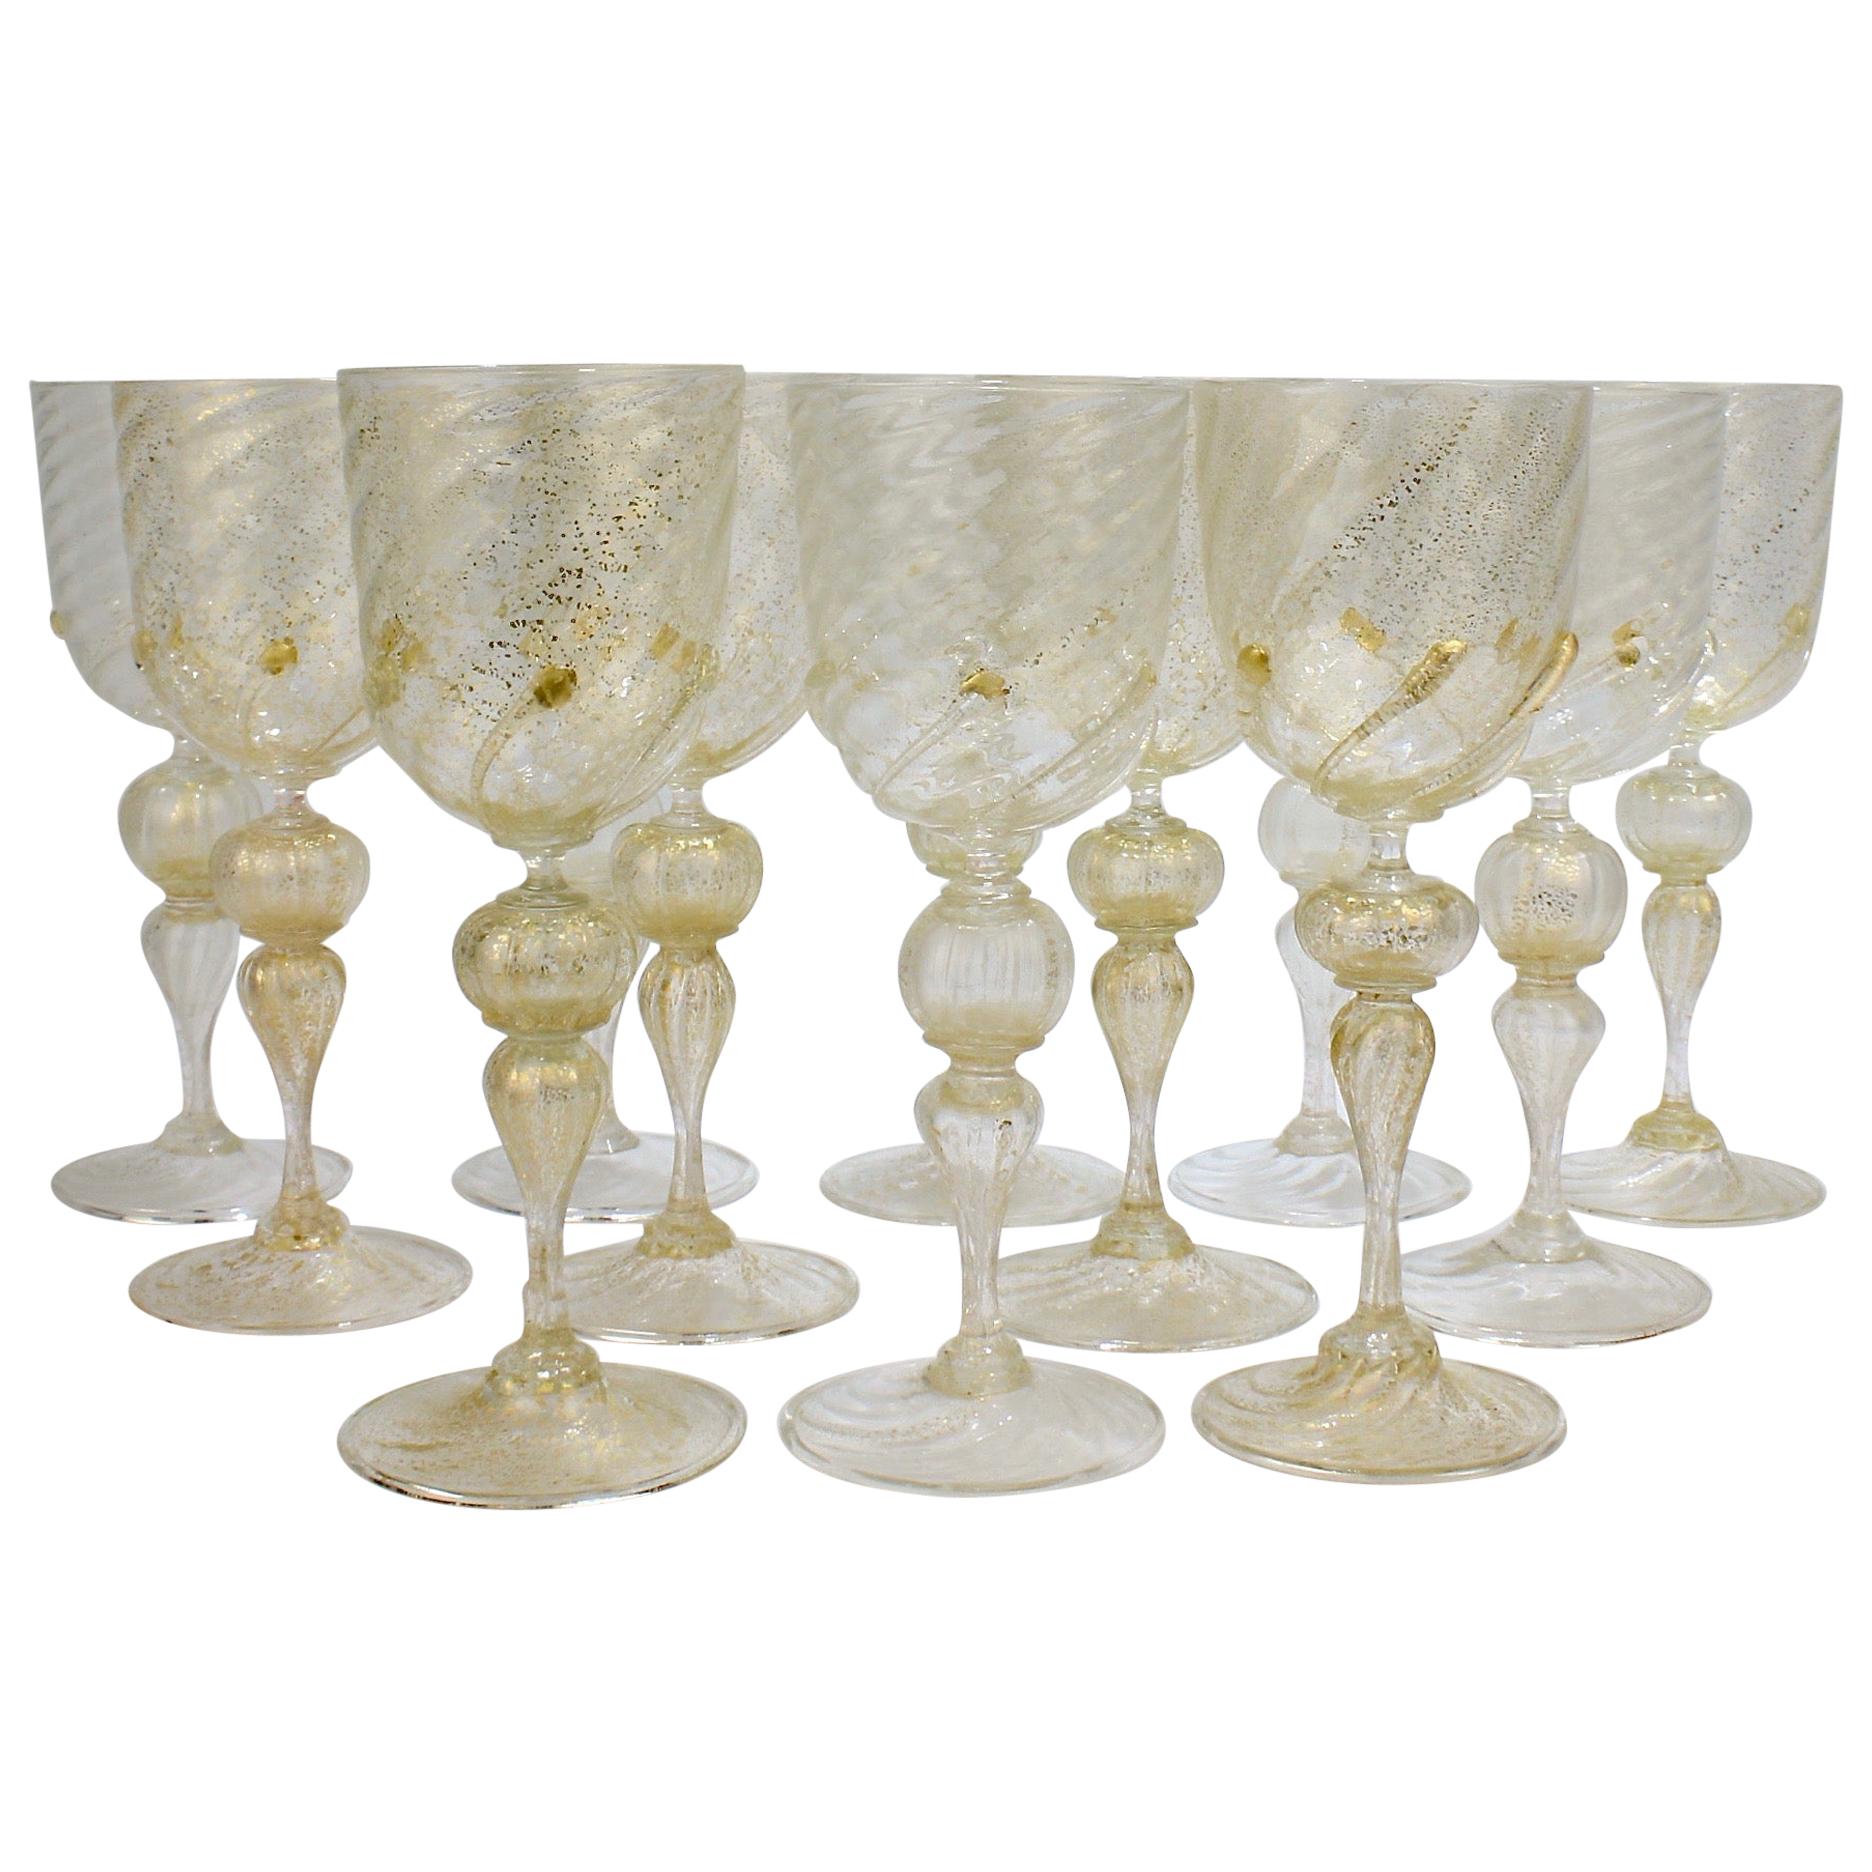 Set of 12 Venetian / Murano Glass Large Water or Wine Goblets w Gold Inclusions